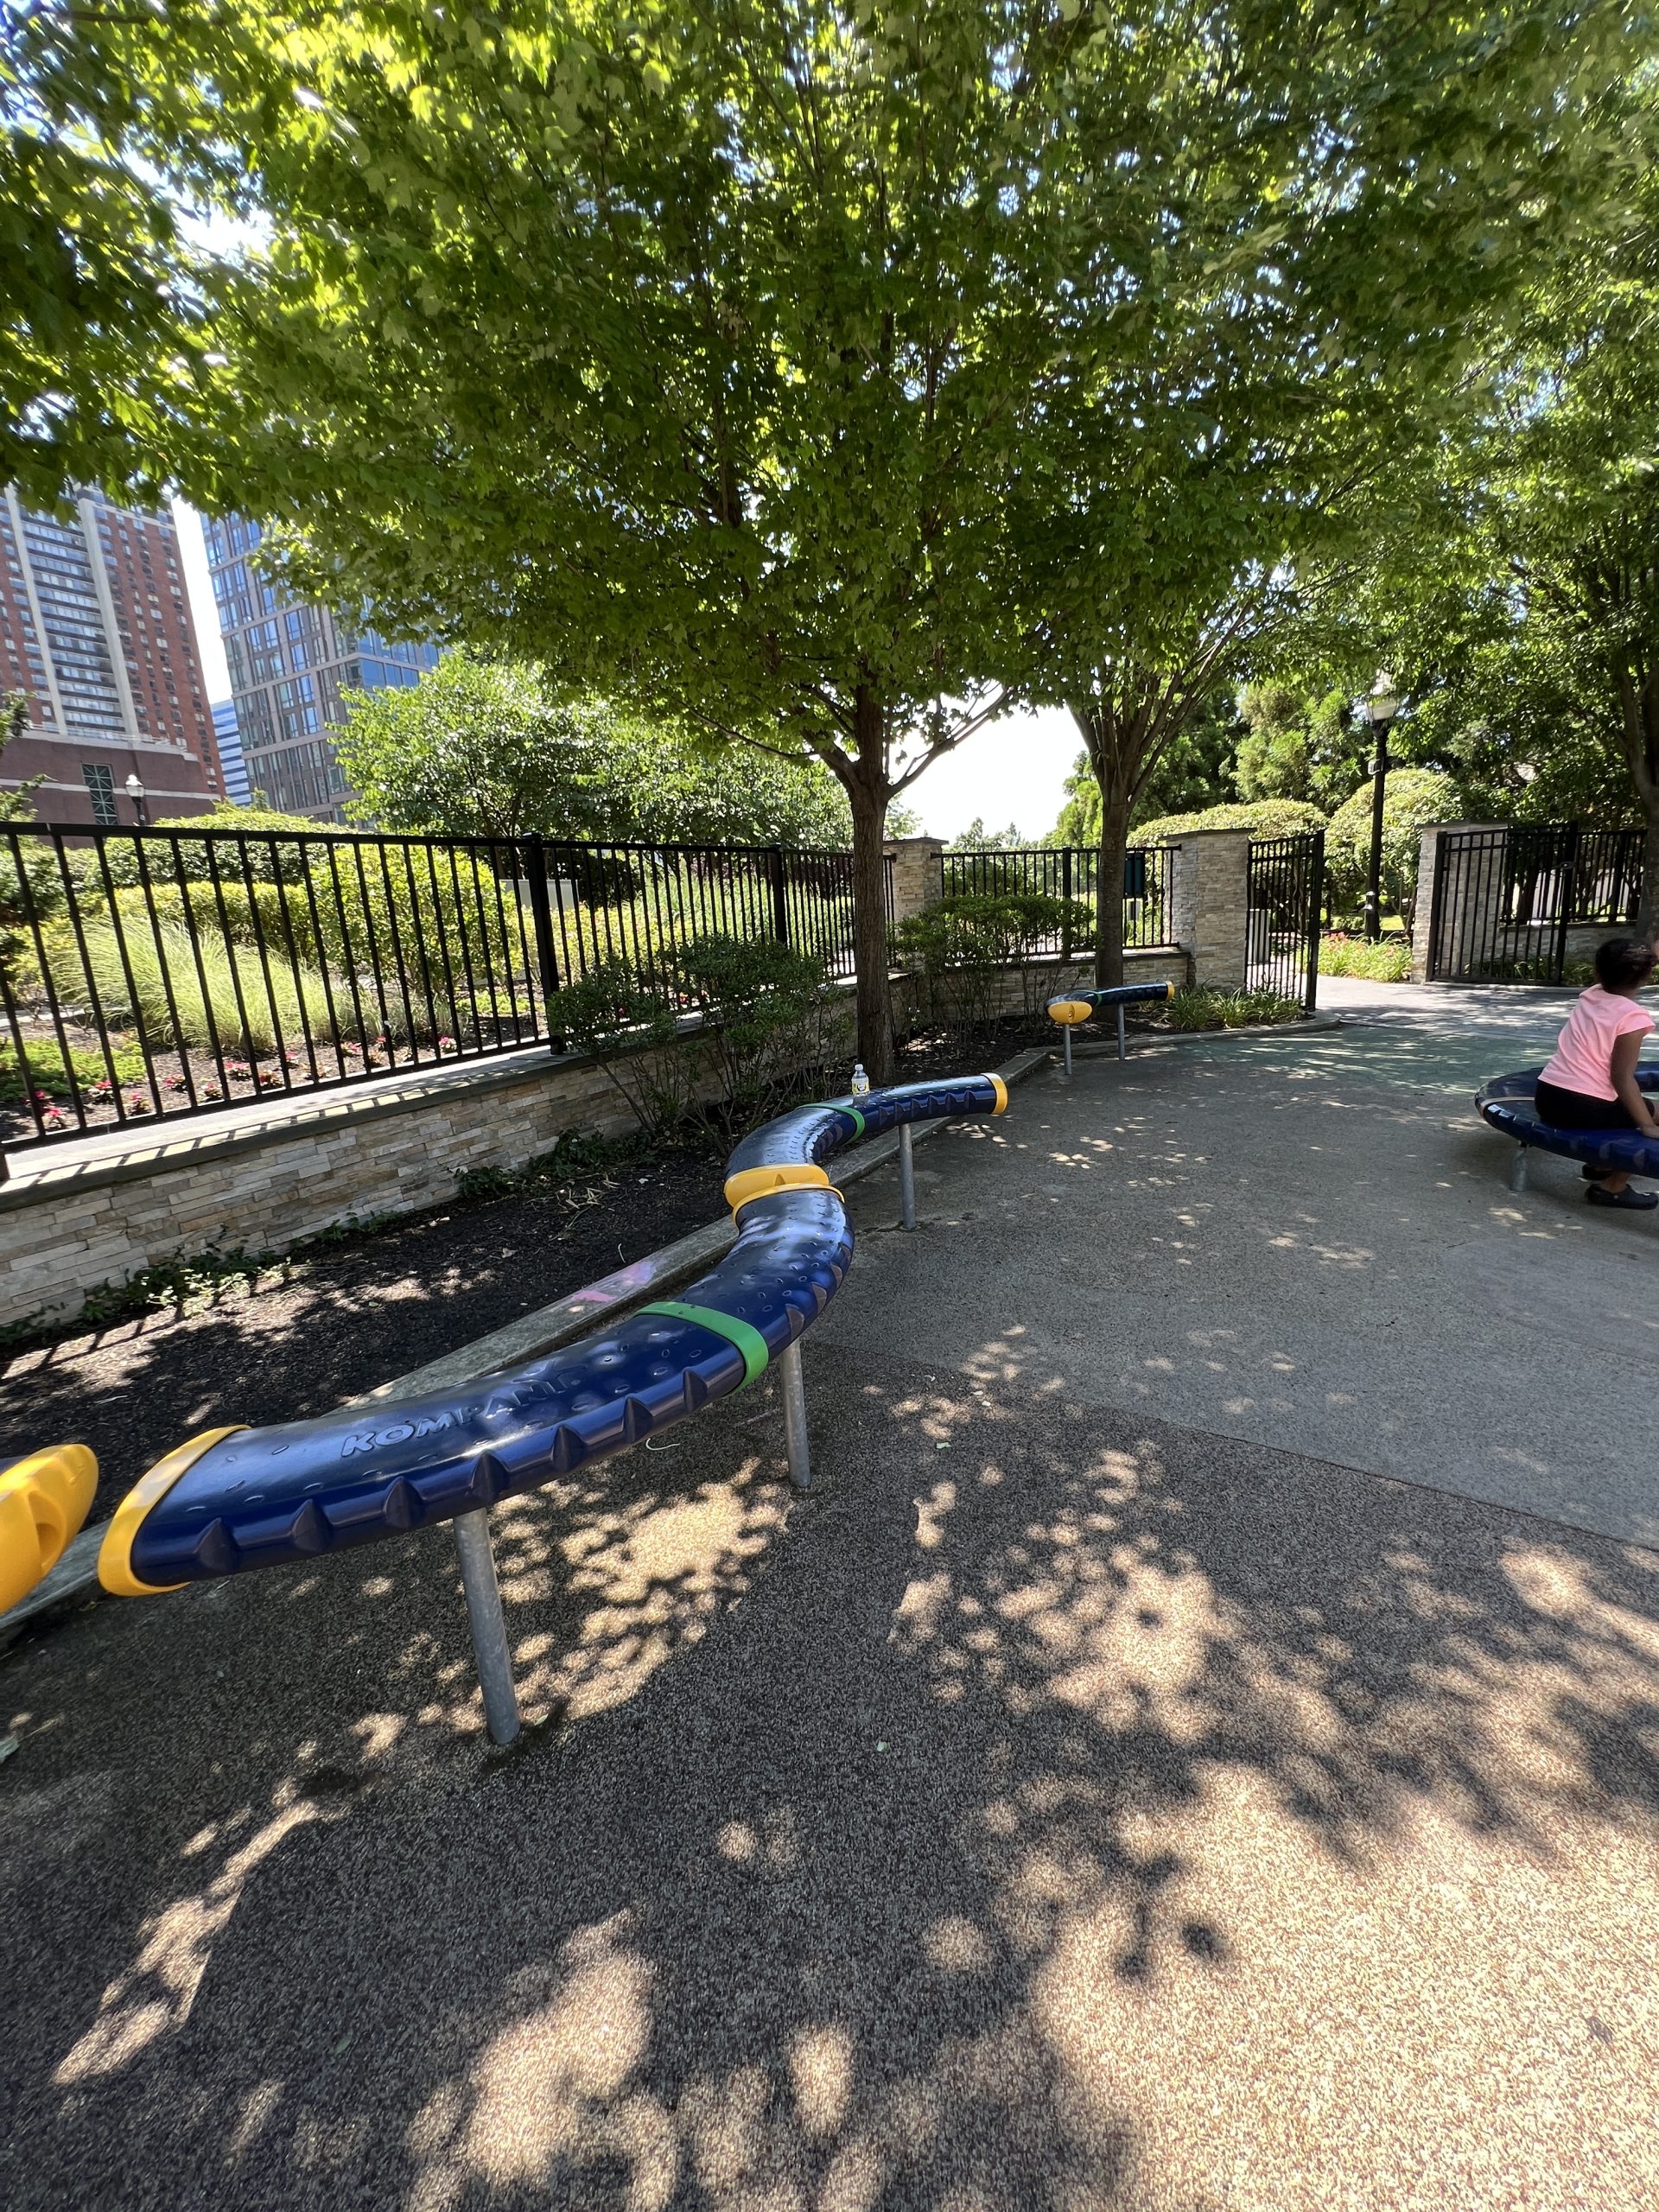 FEATURES - balance beam AT Newport Green Park Playground in Jersey City NJ